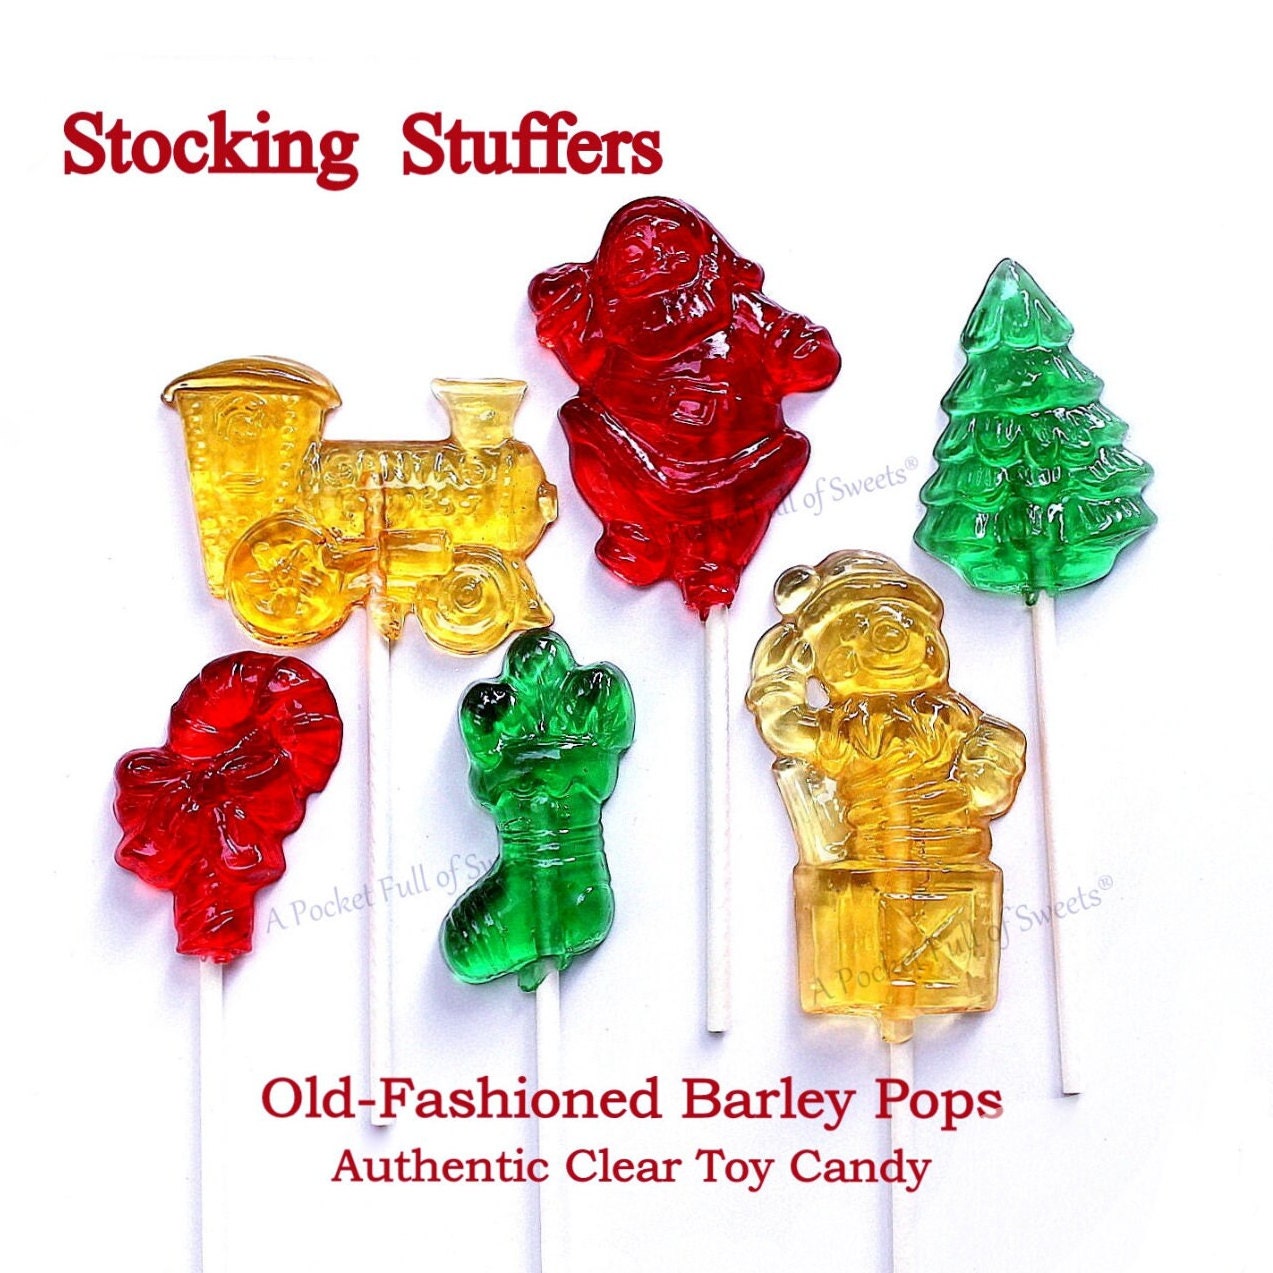 Old Fashioned Clear Toy Candy 16oz- 2 bags - Peppermint Stick